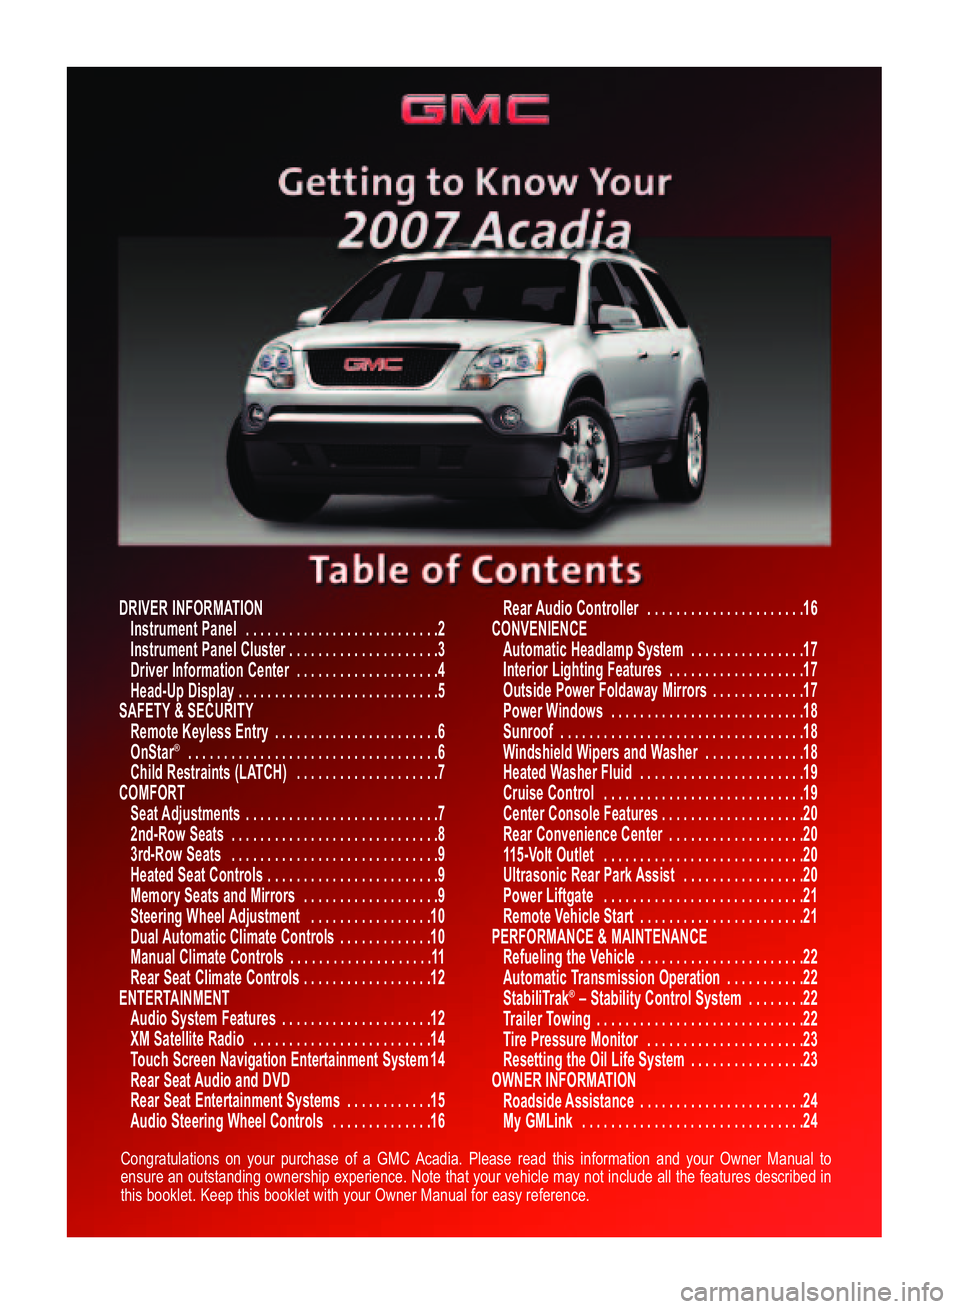 GMC ACADIA 2007  Get To Know Guide 